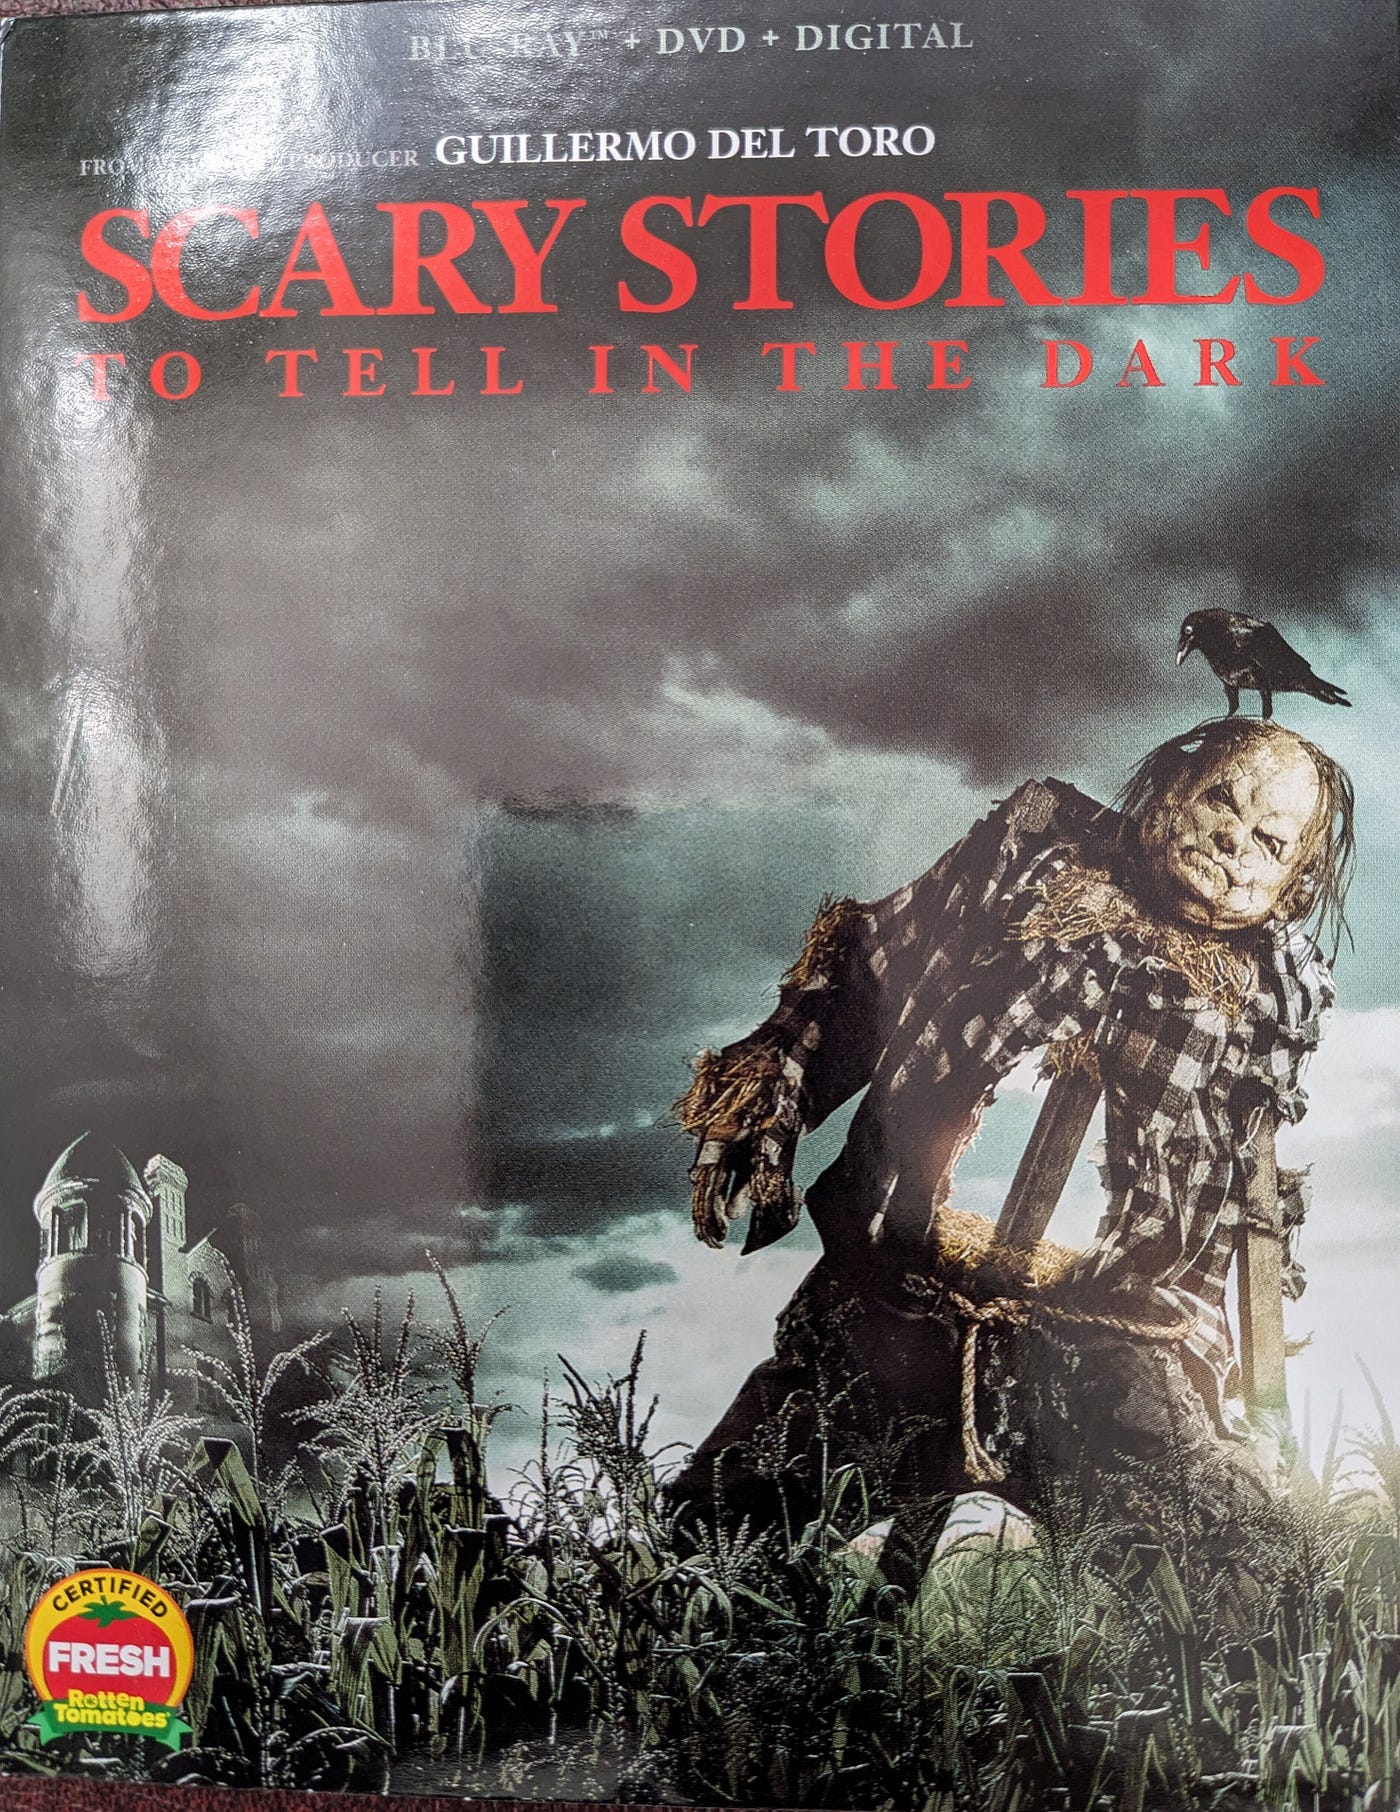 A Film Adaptation of a Childhood Classic: 'Scary Stories to Tell in the Dark'  | Reviewsday Tuesday